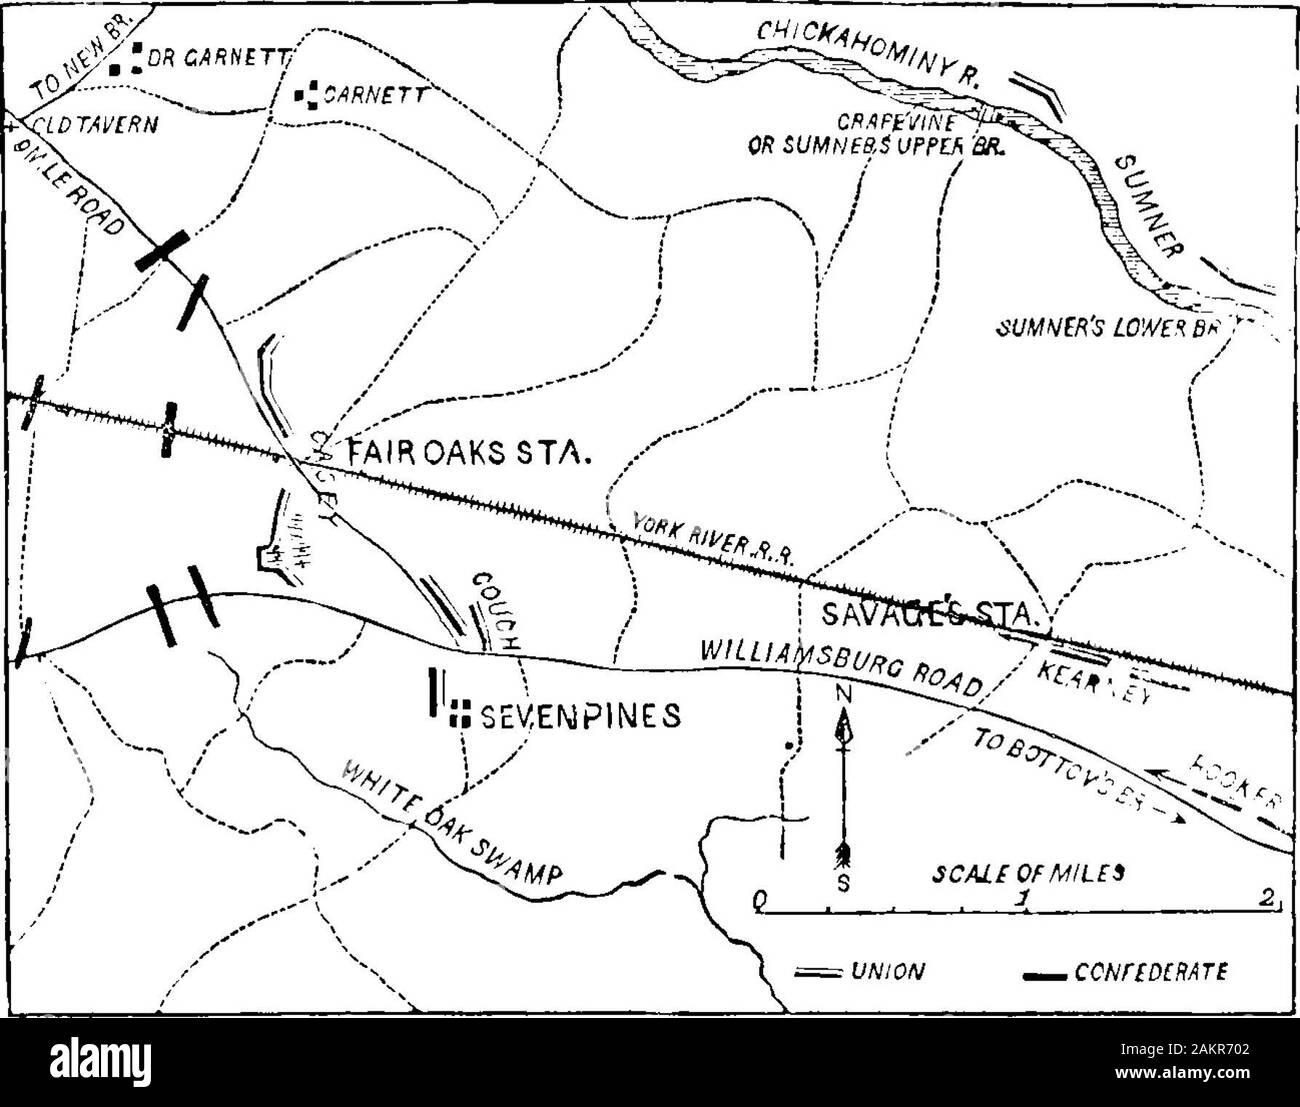 Campaigns of the Army of the Potomac [electronic resource]: a critical history of operations in Virginia, Maryland and Pennsylvania, from the commencement to the close of the war 1861-5 . ders) satisfied me that the enemy was not in force onthe Charles City road, but was on the Williamsburg road, and that he hadfortified himself about the Seven Pines. The fact was further established, thatthe whole of Keyes corps had crossed the Chickahominy. These facts I com-municated to General Johnston about noon on Friday, 30th of May. I receiveda prompt answer from him, that, being satisfied by my report Stock Photo